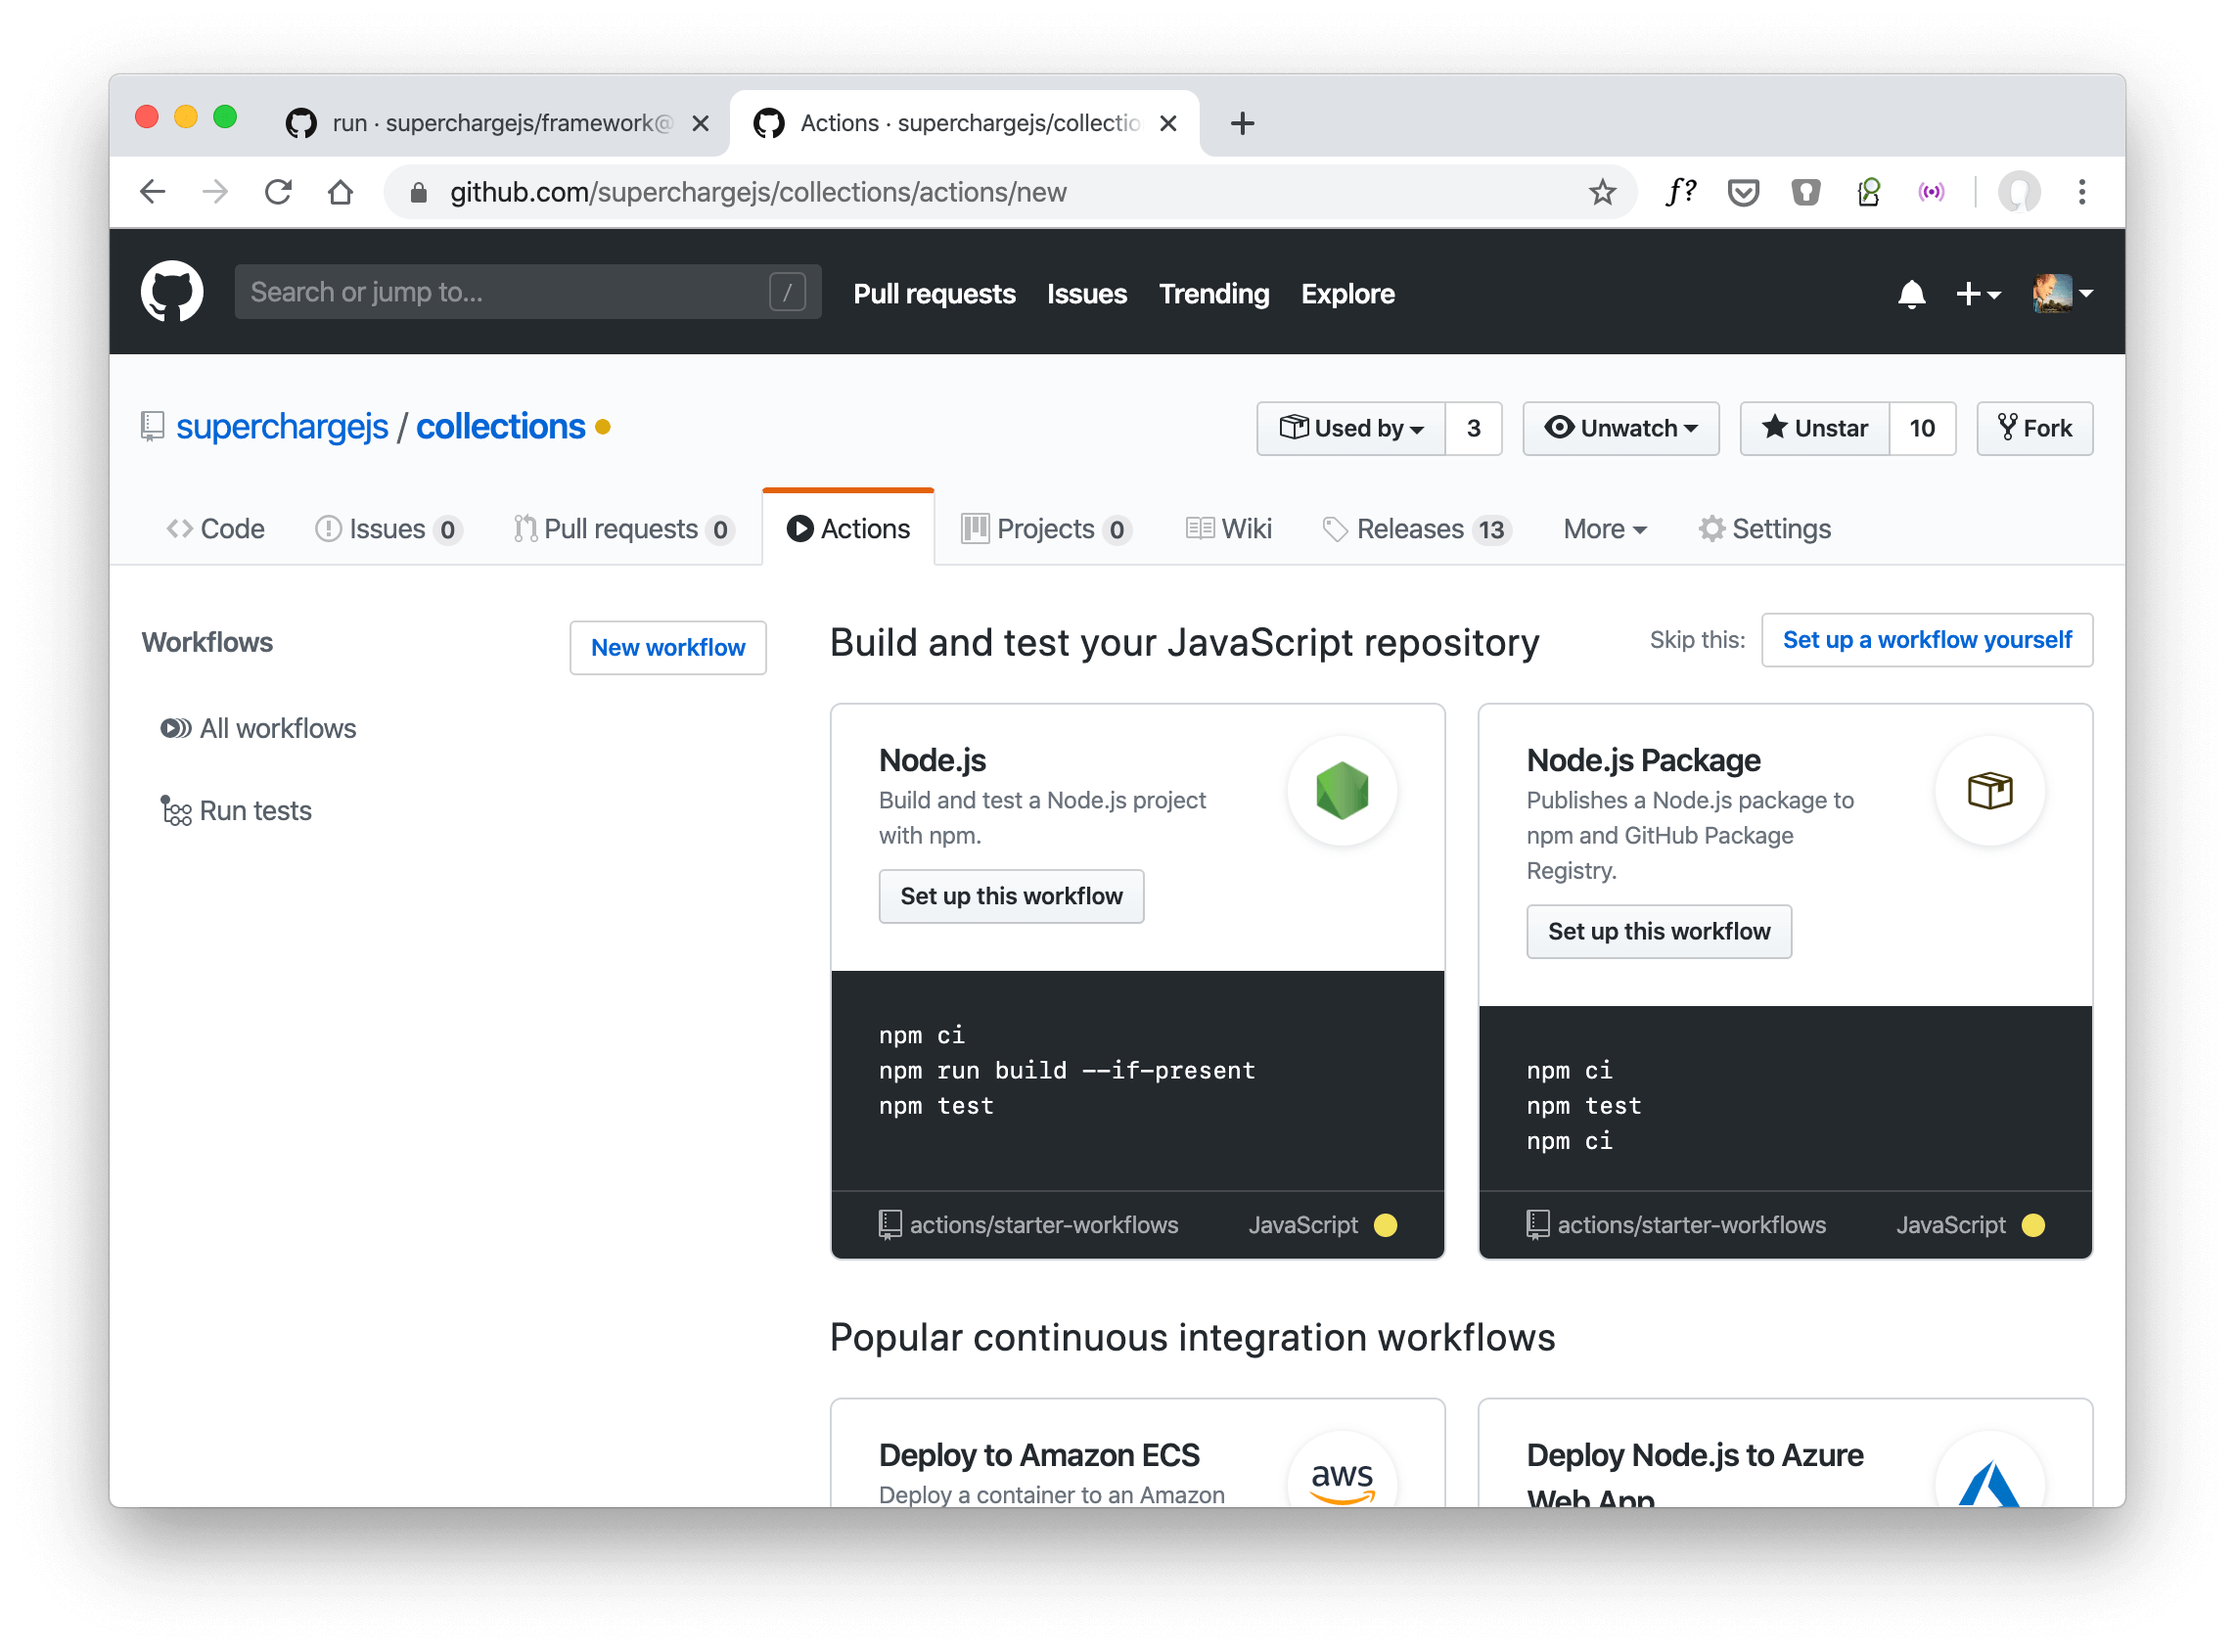 GitHub Actions workflow overview